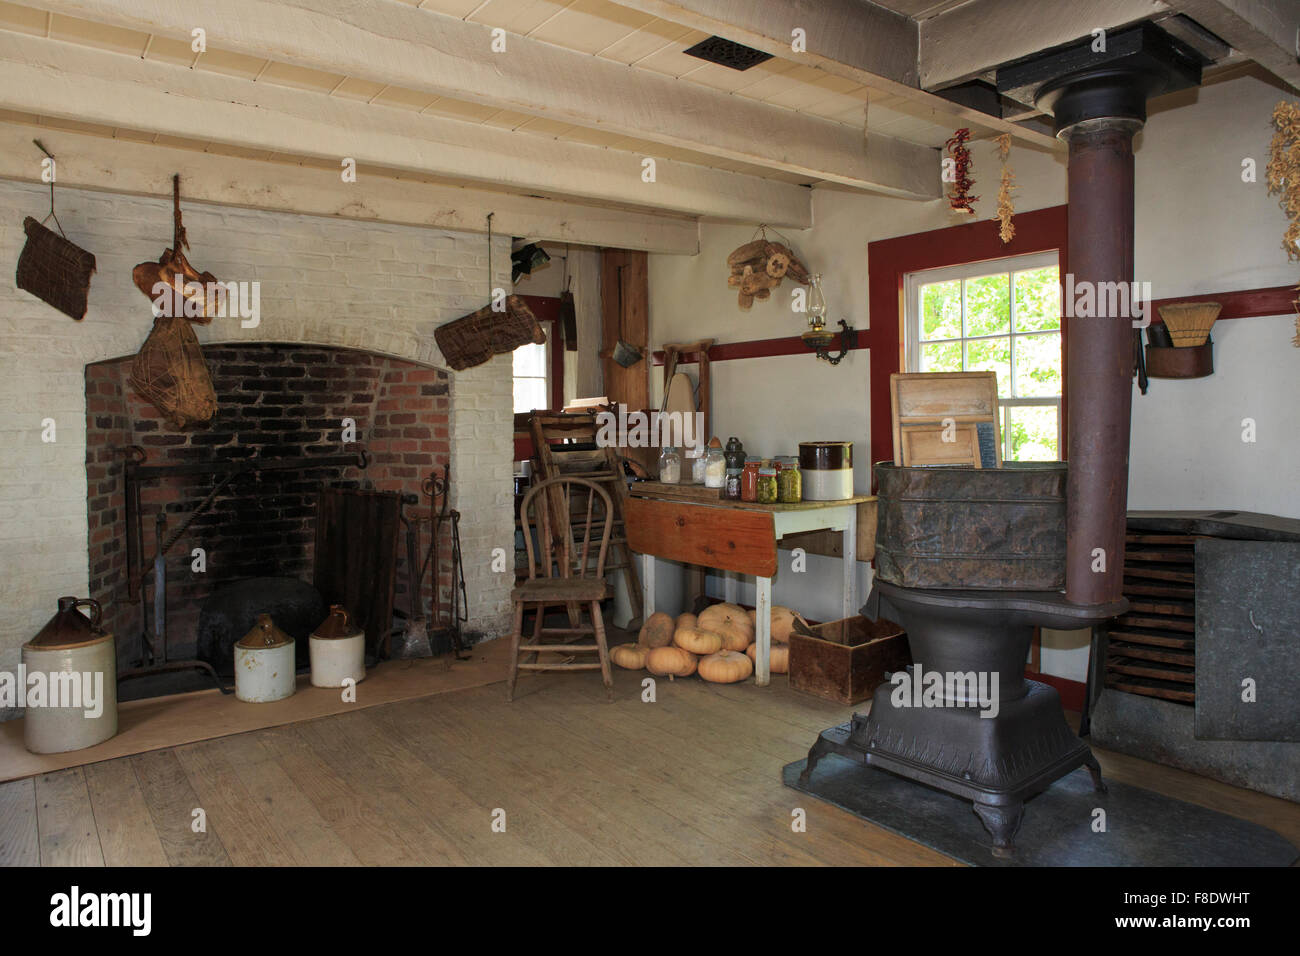 Summer Kitchen At An Old Farmhouse Stock Photo Royalty Free Image